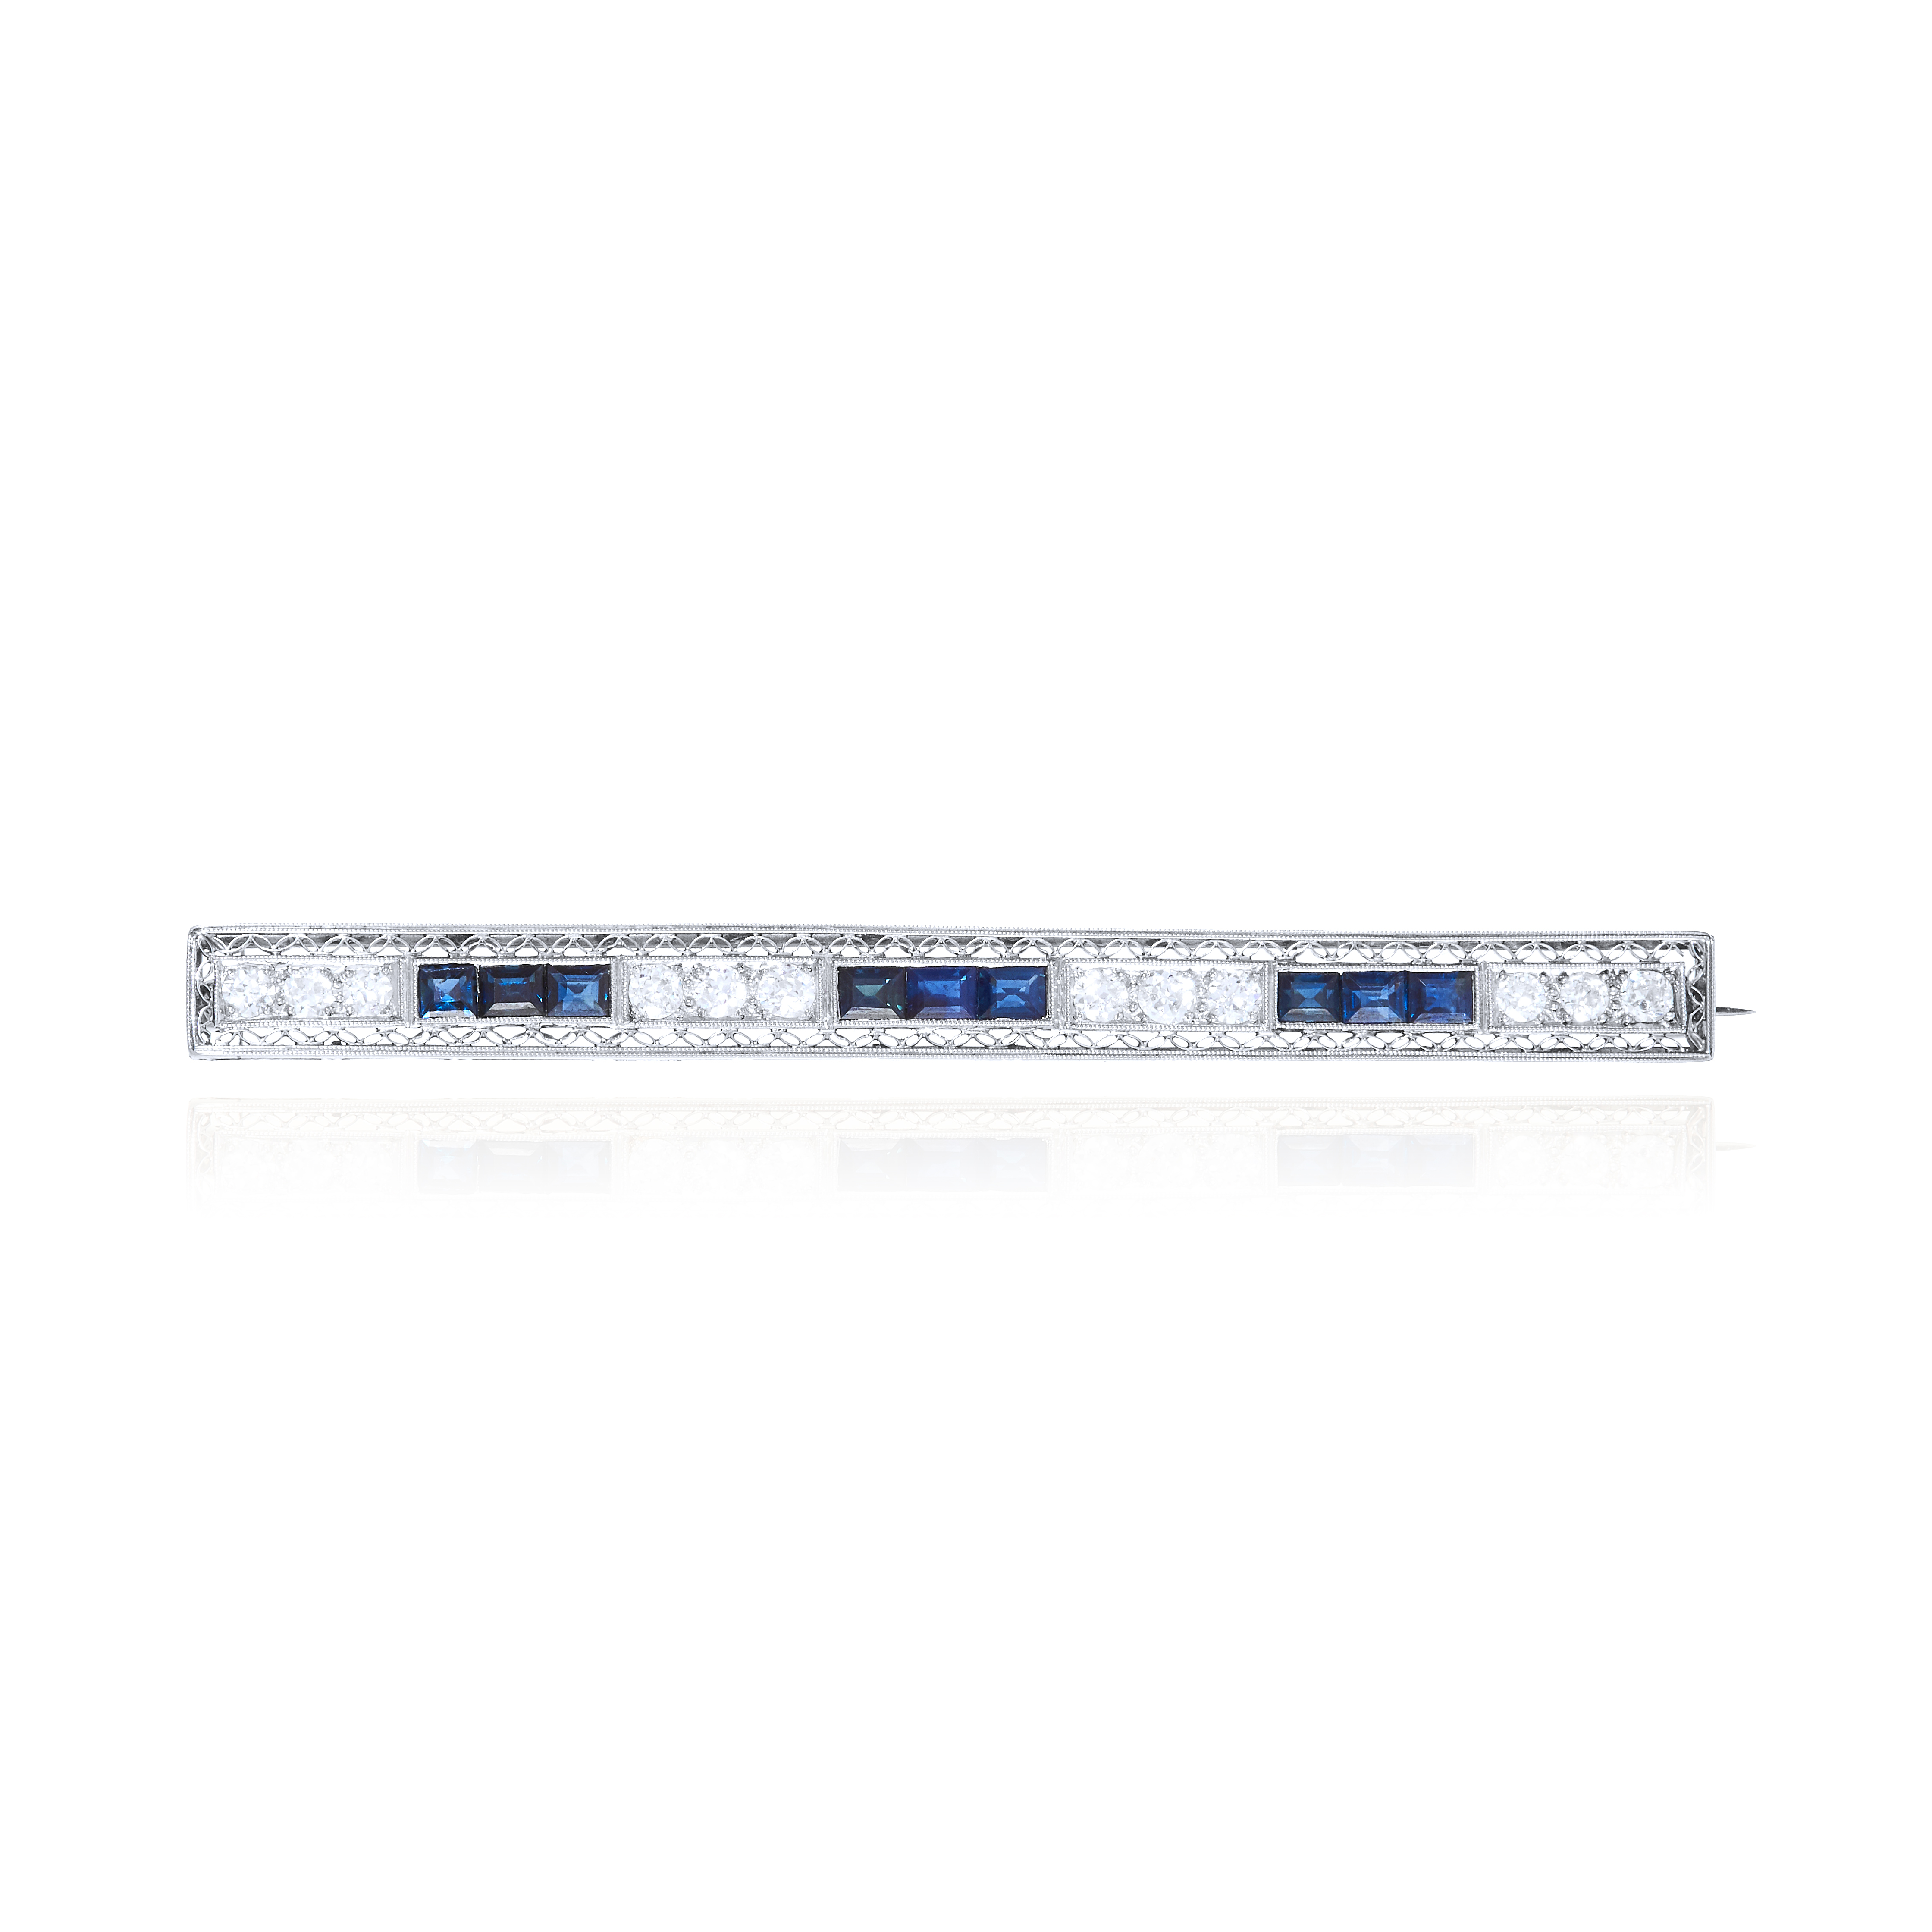 AN ART DECO SAPPHIRE AND DIAMOND BAR BROOCH in platinum or white gold, set with alternating trios of